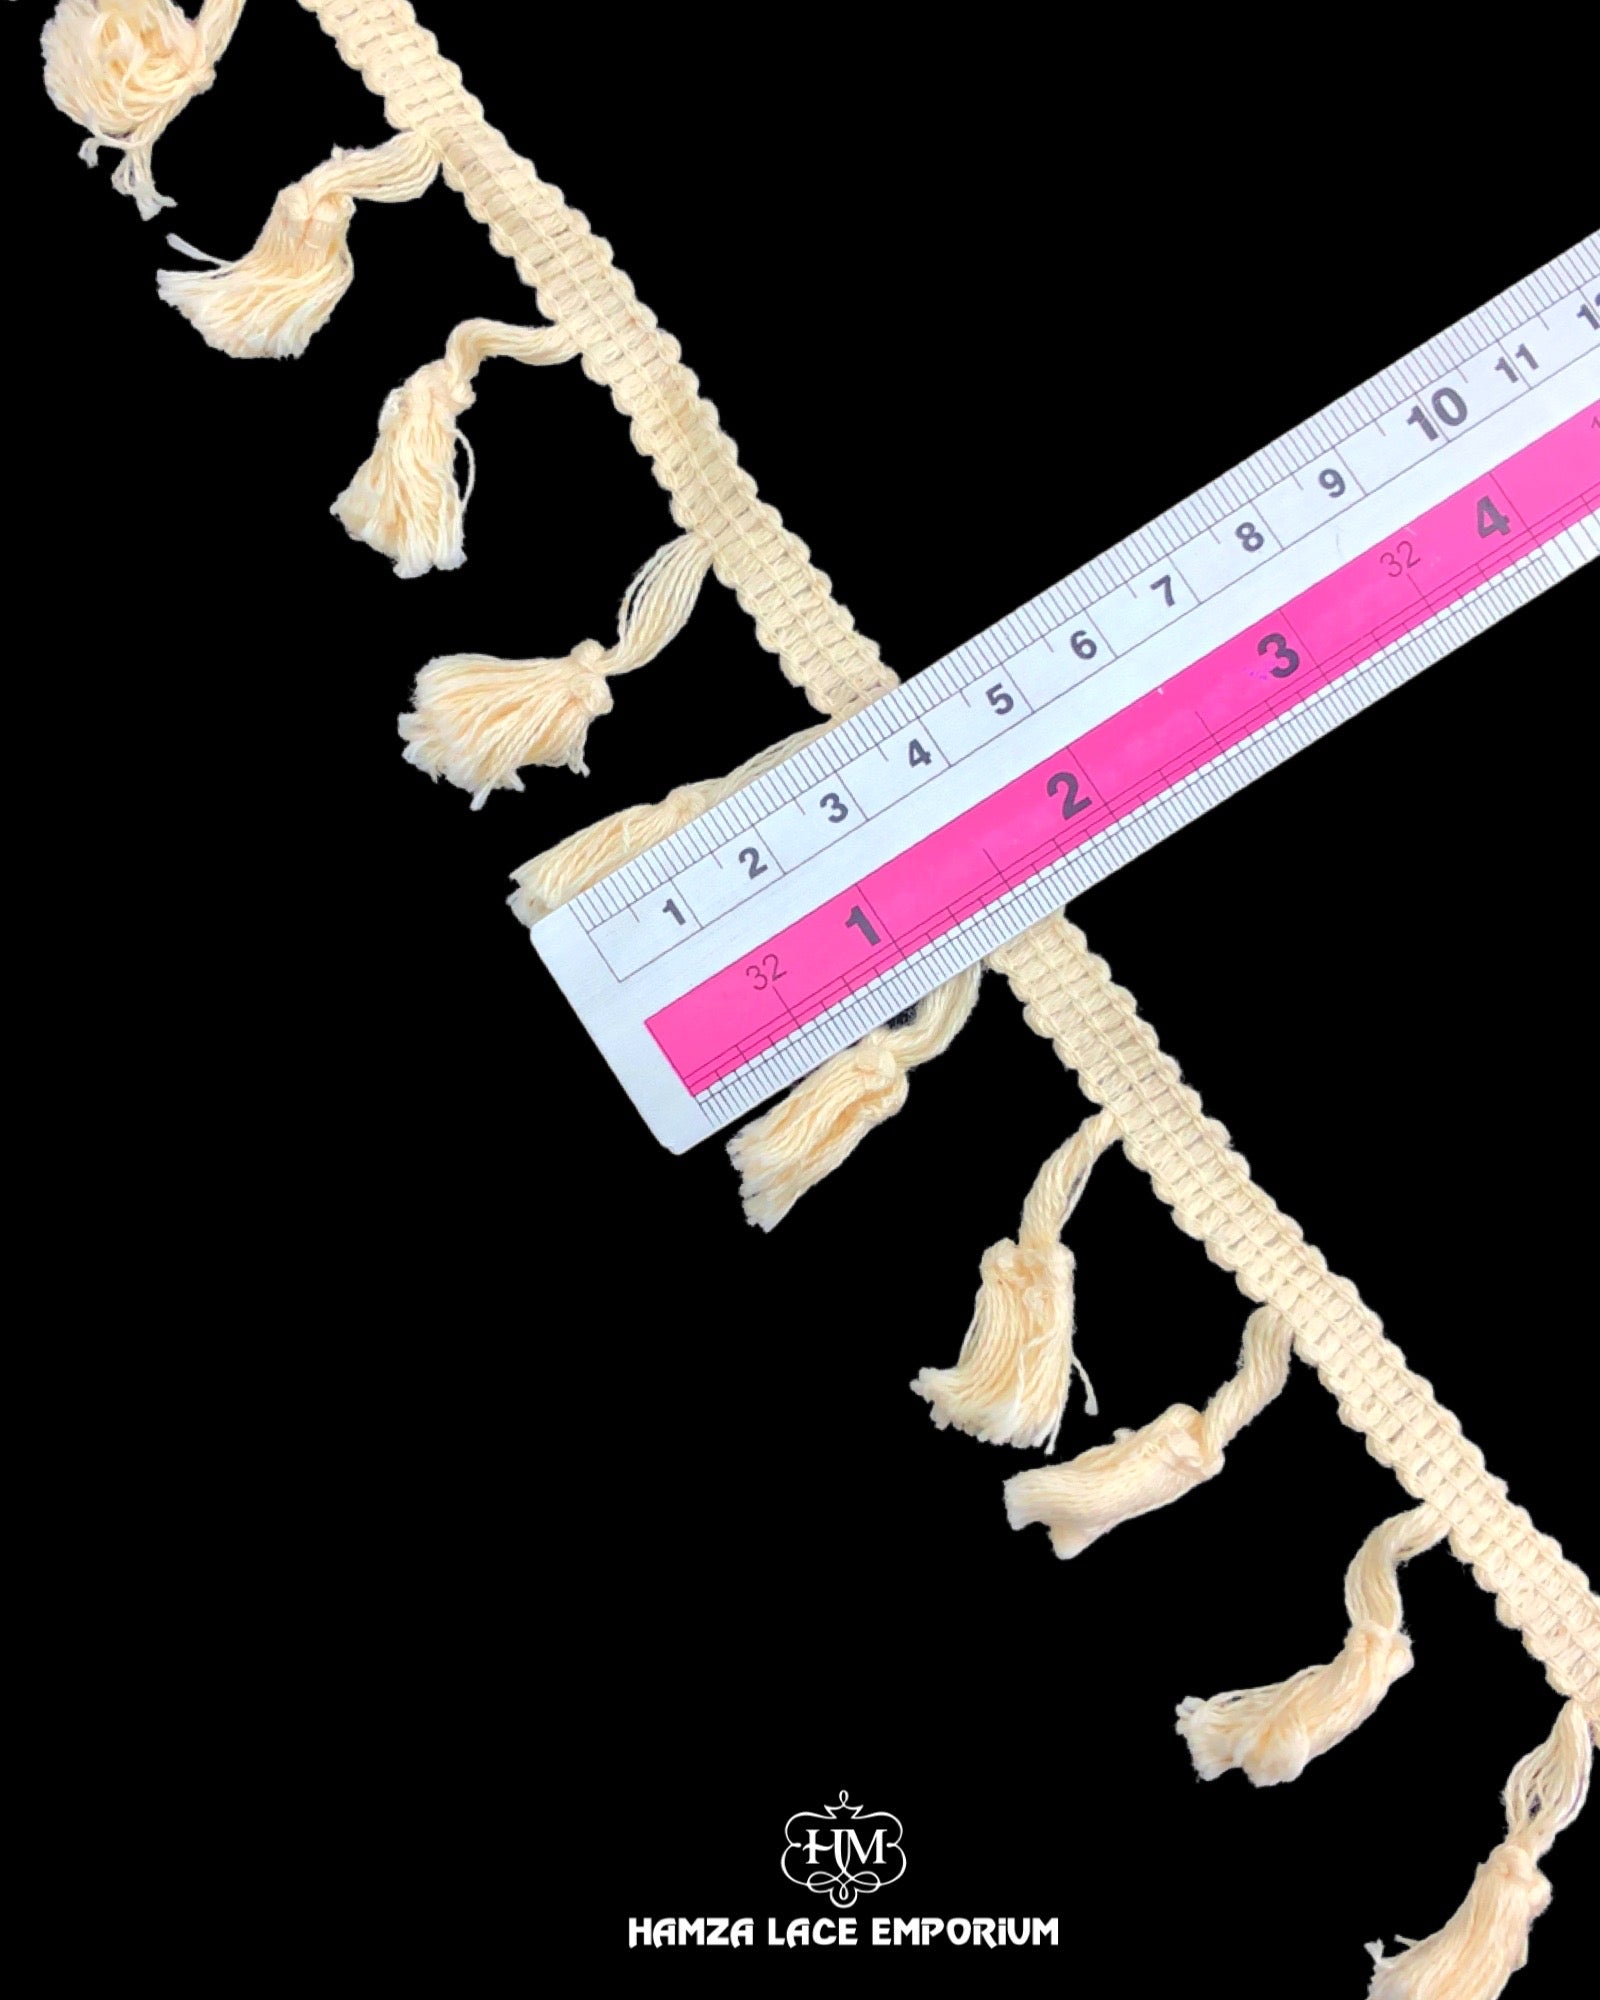 Size of the 'Edging Jhaalar Lace 21351' is displayed with the help of a ruler as '0.5' inches